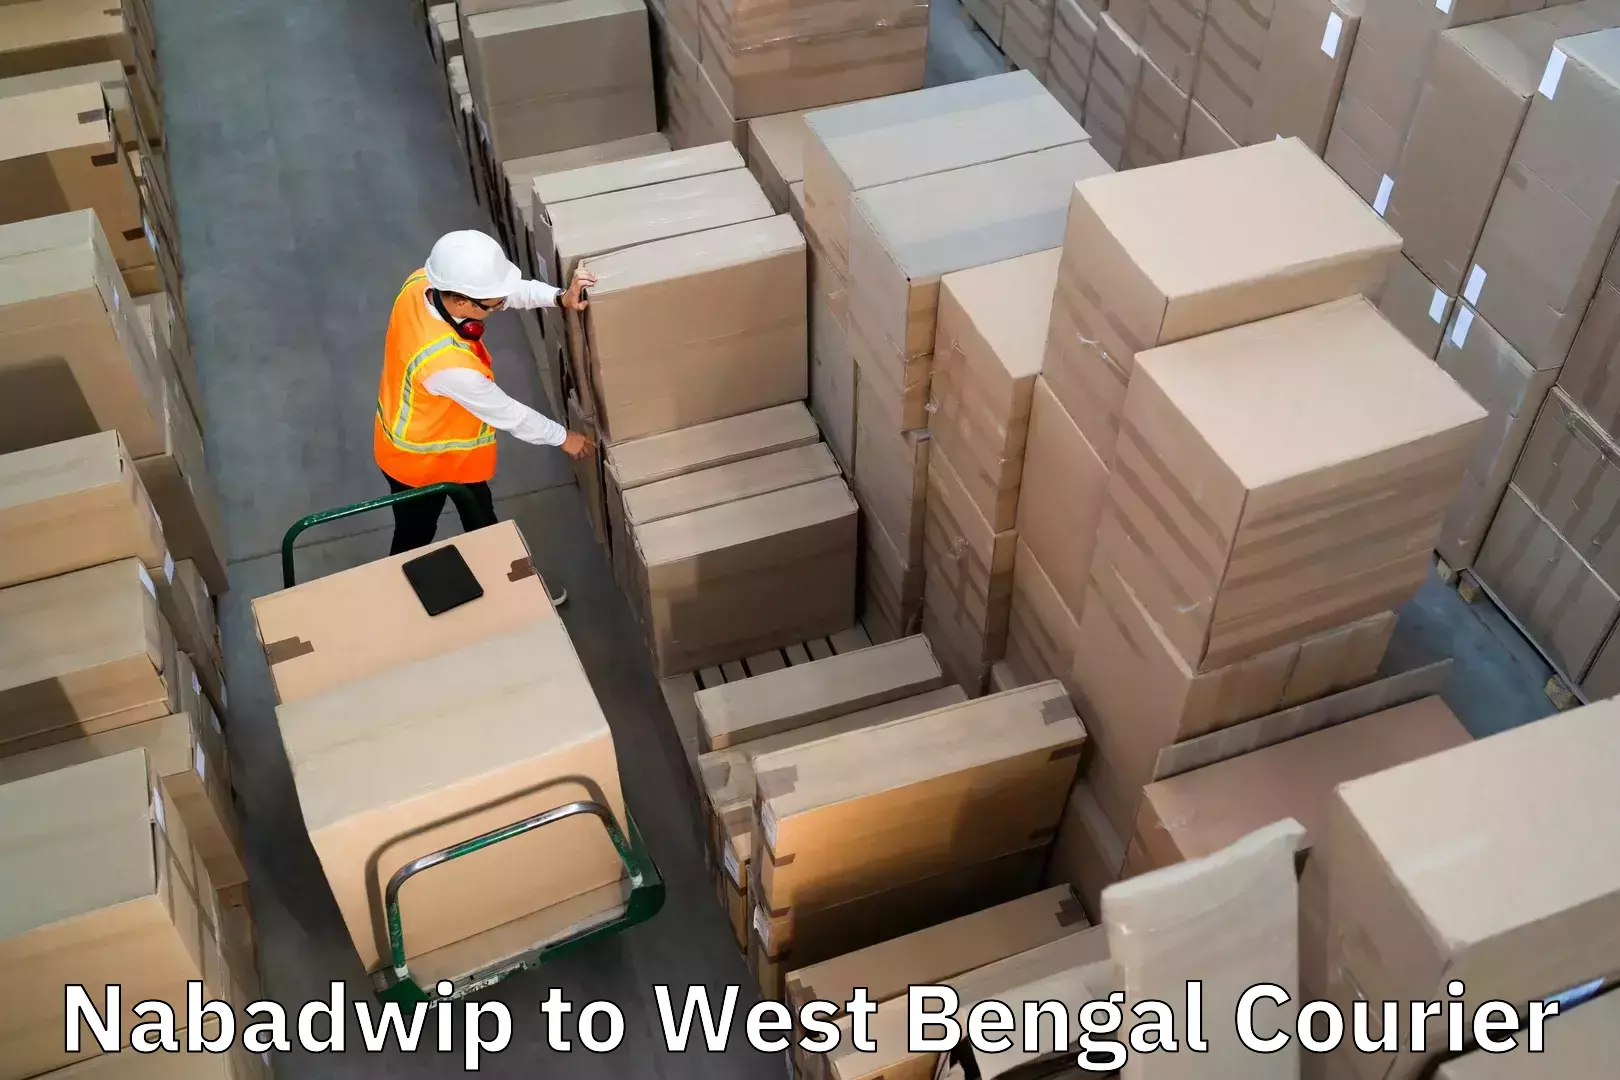 Luggage delivery app Nabadwip to West Bengal